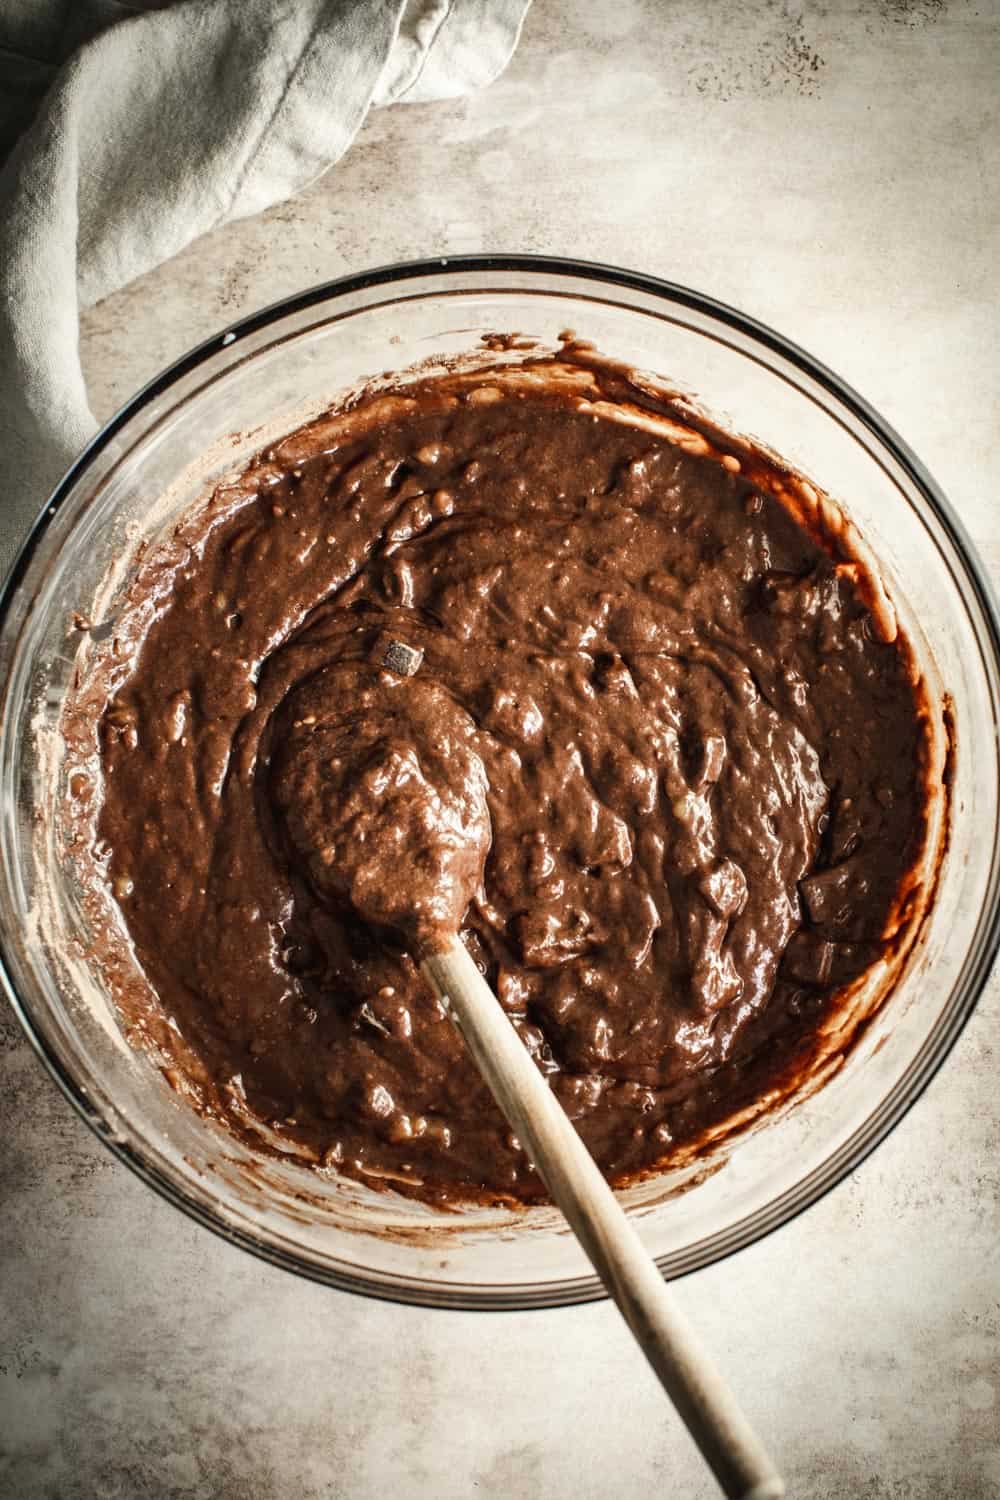 Chocolate banana bread batter in a mixing bowl.